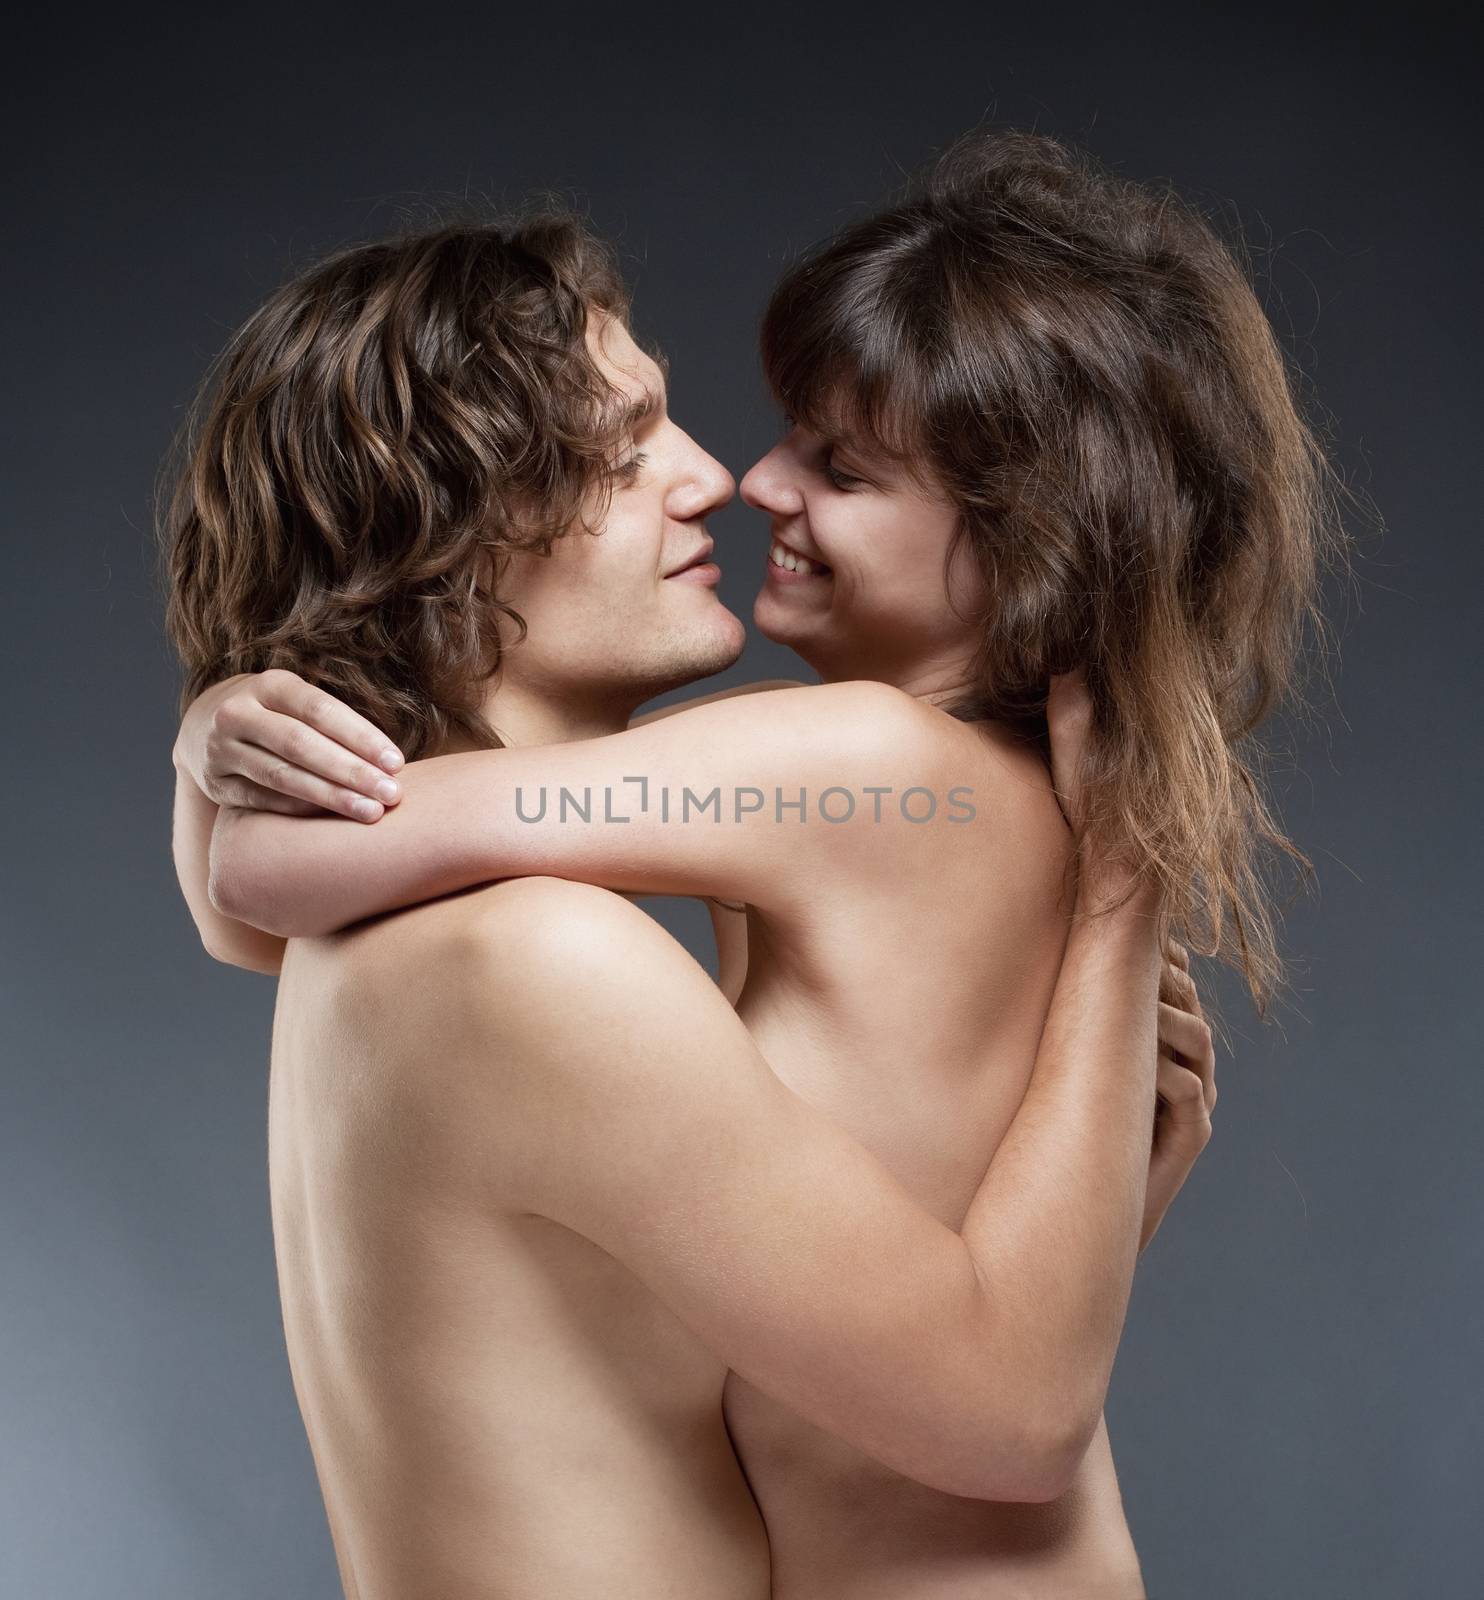 Portrait of a Young Romantic Couple Embracing